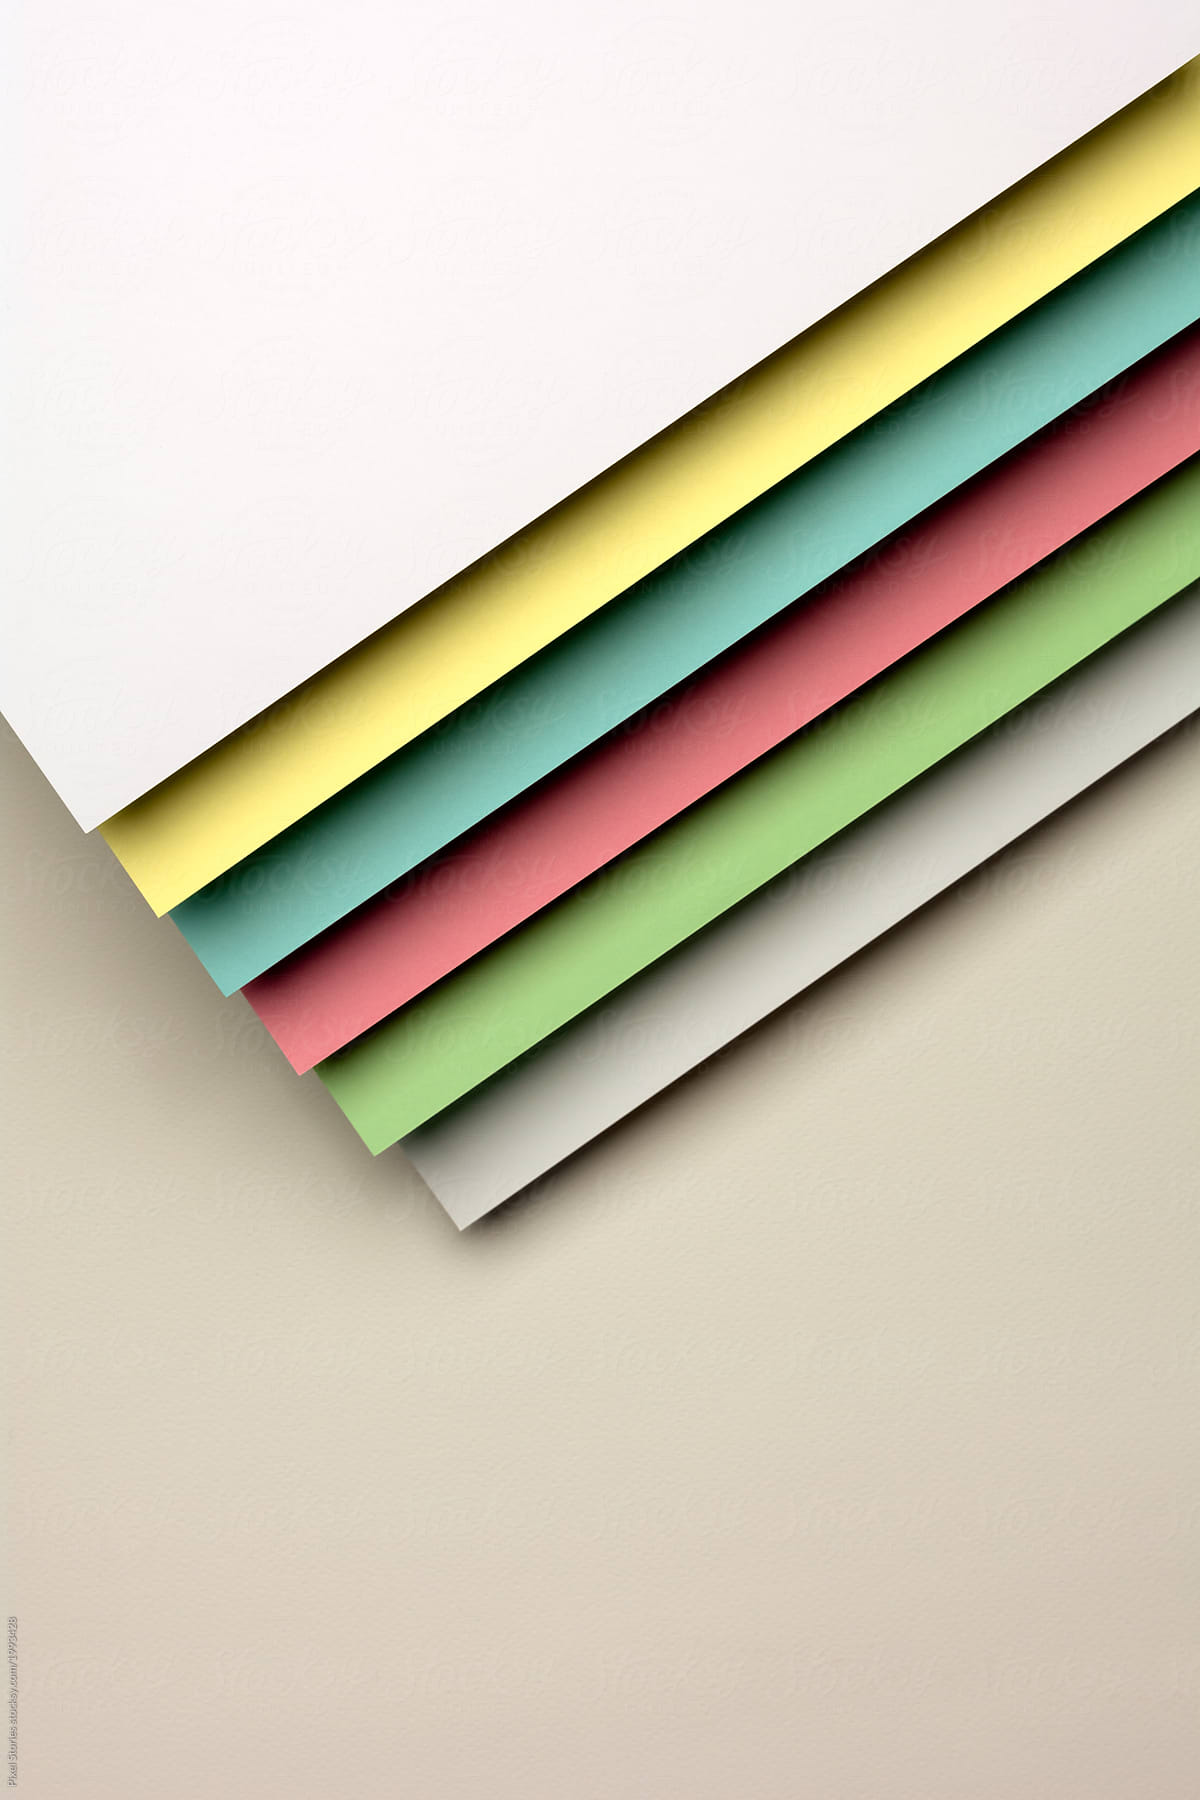 Colorful folded paper material design background